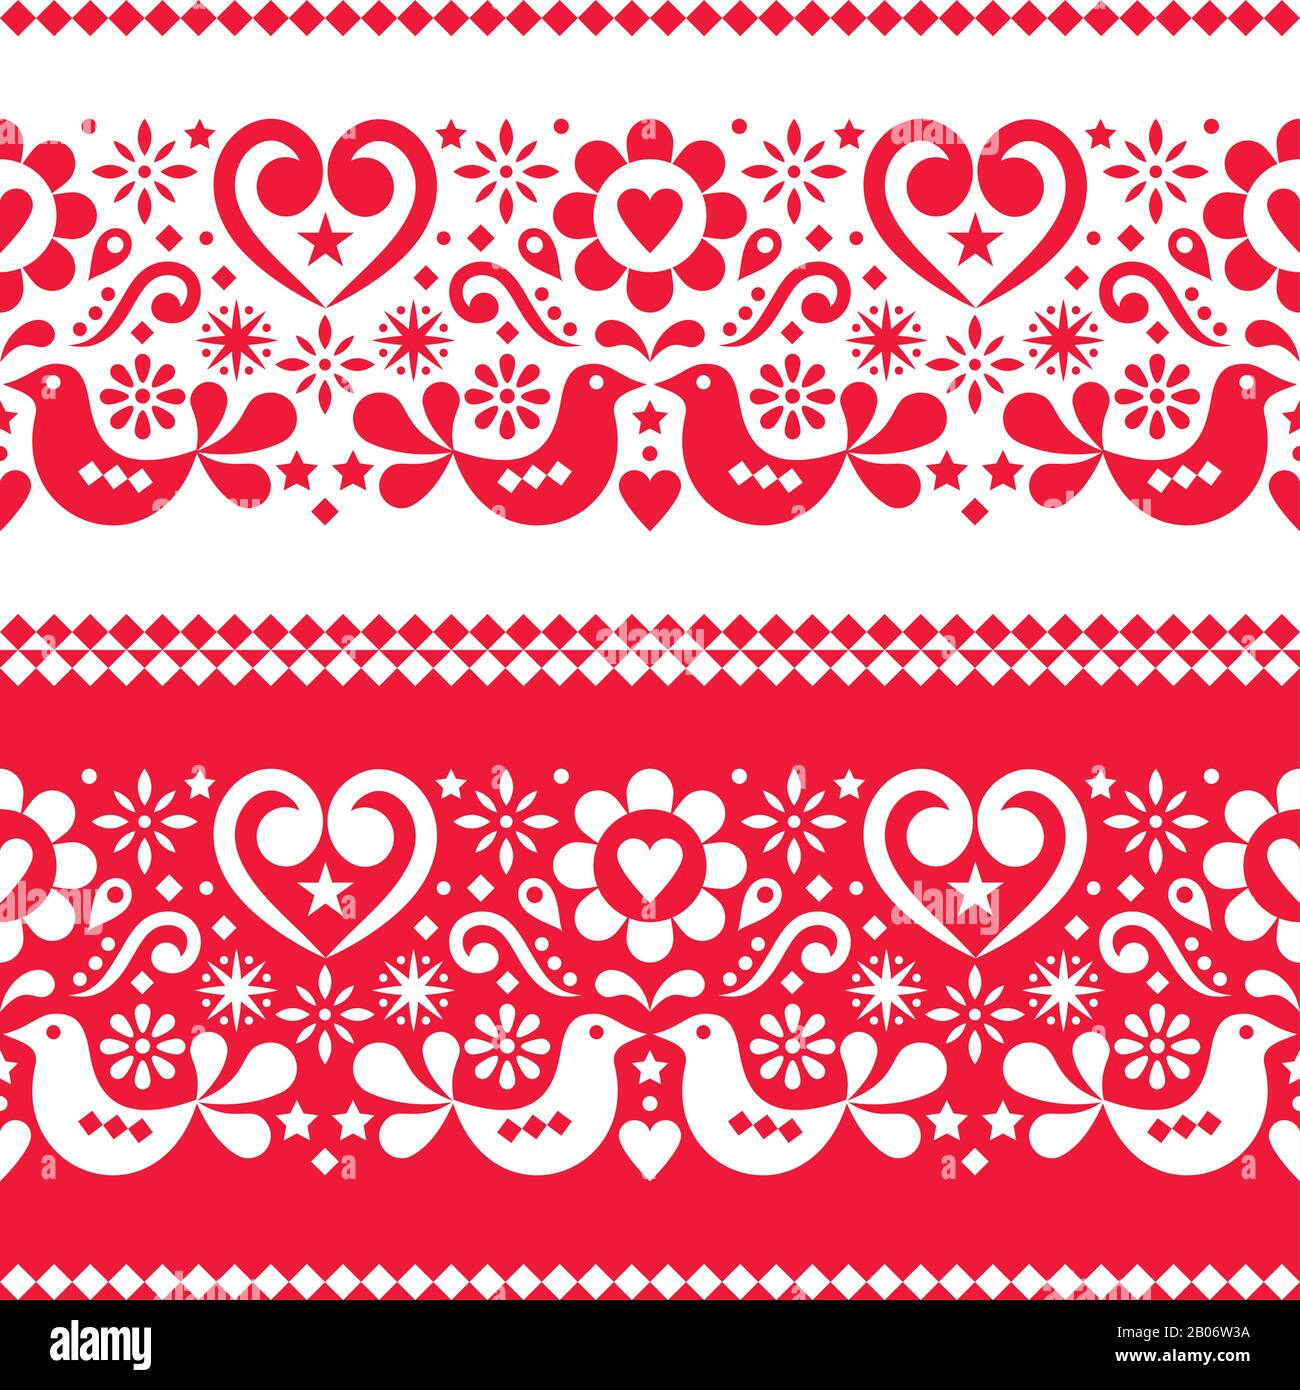 Seamless Scandinavian folk art vector pattern with birds, hearts and flowers in red and white Stock Vector